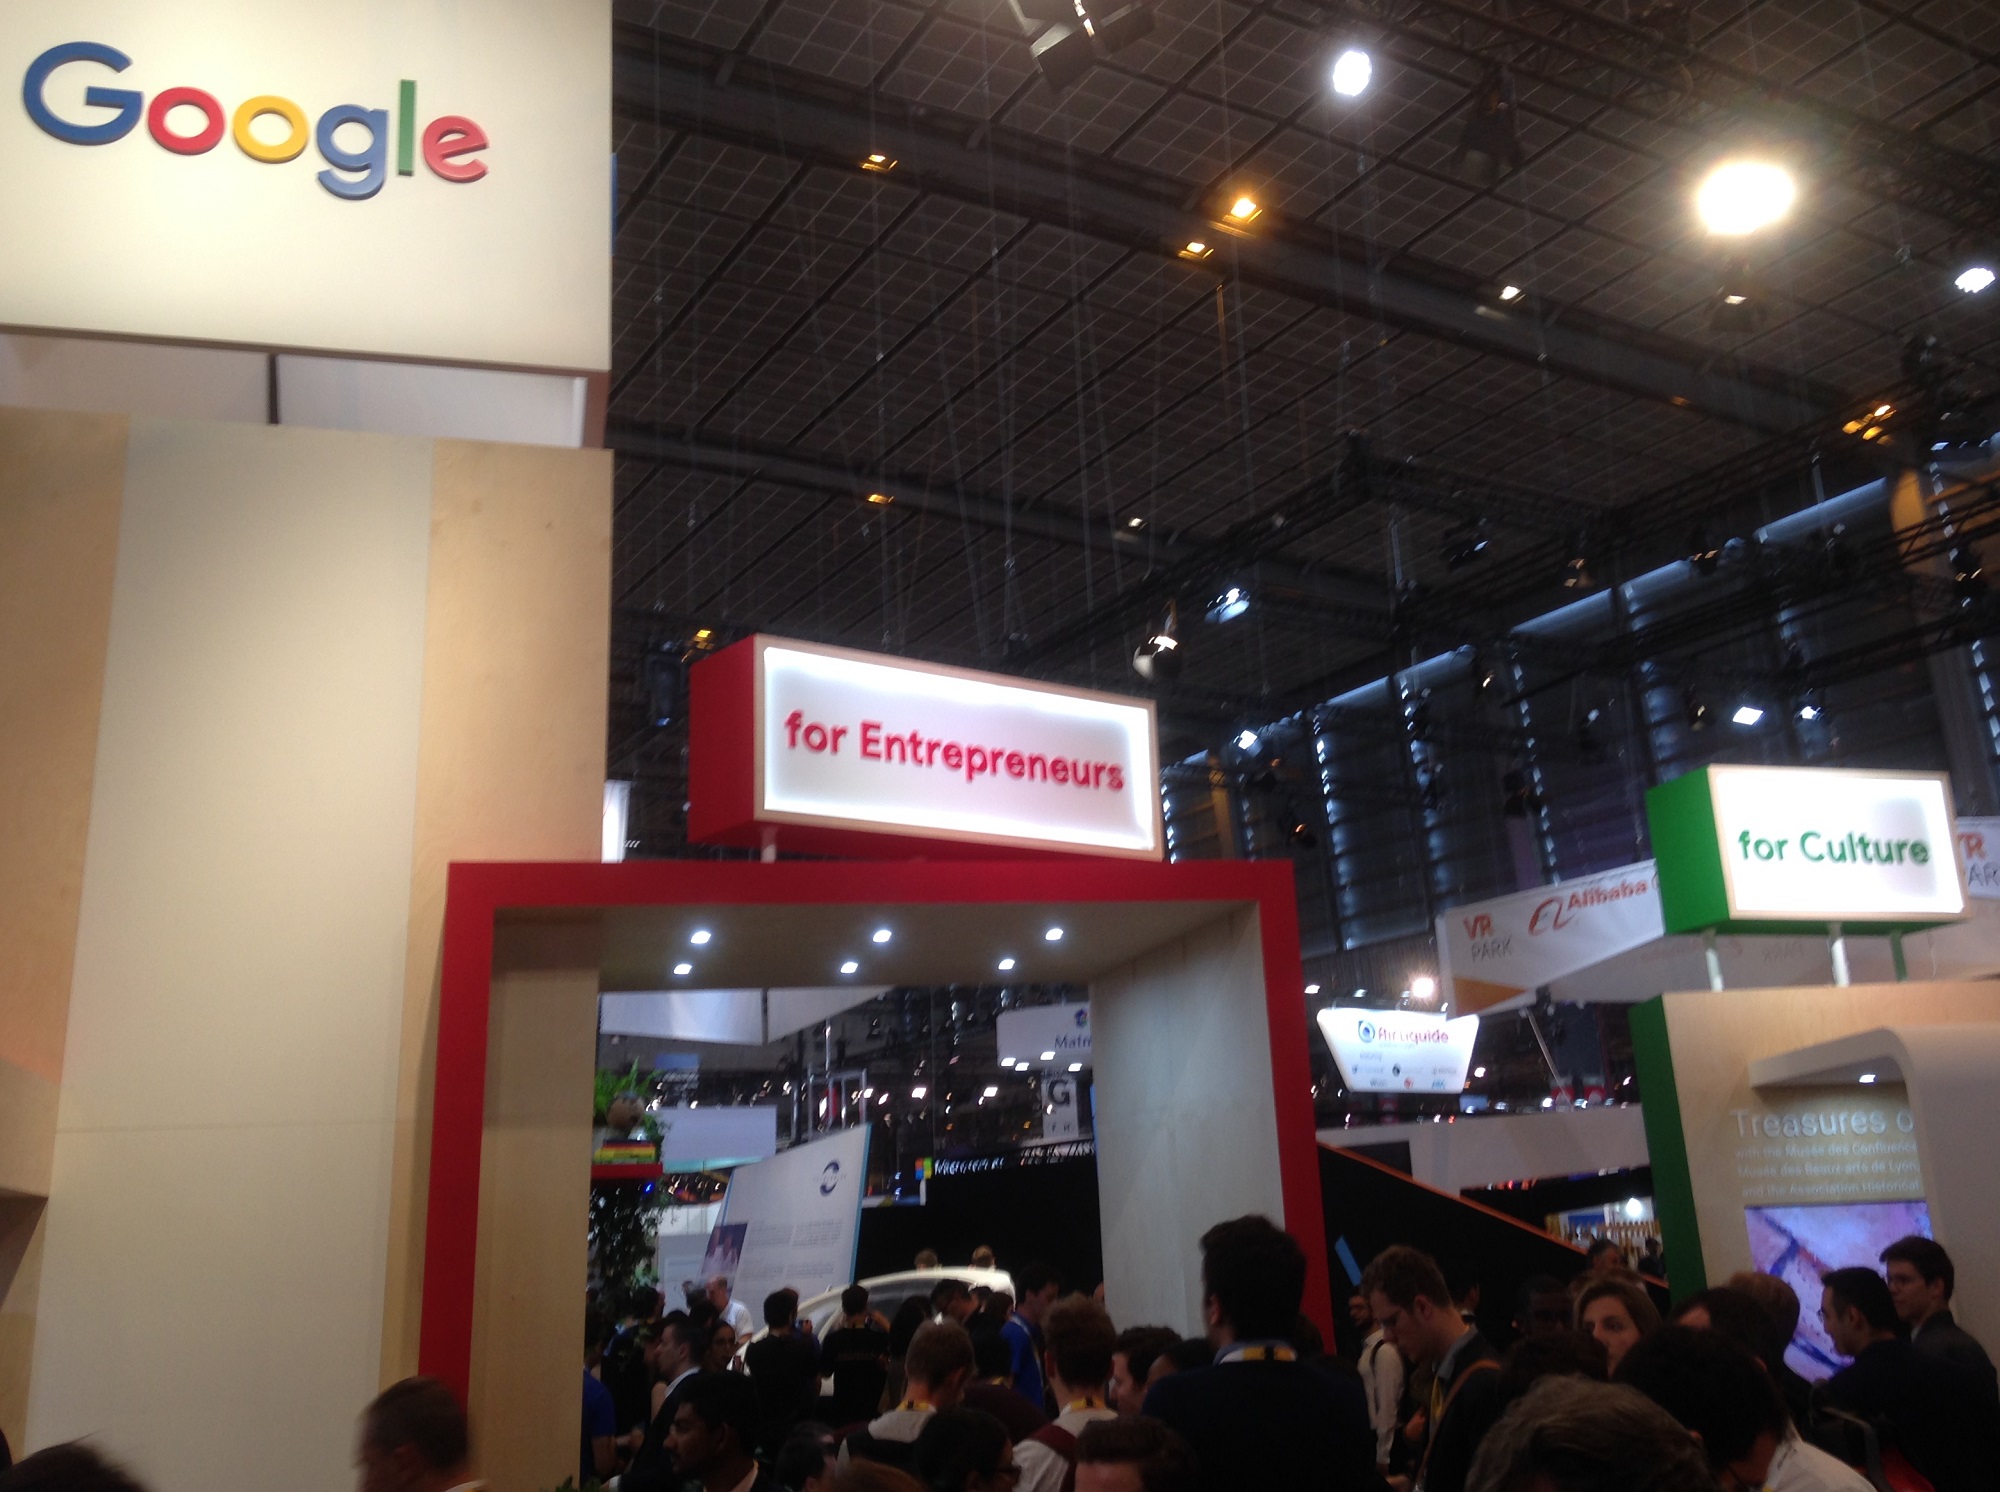 Le stand Google